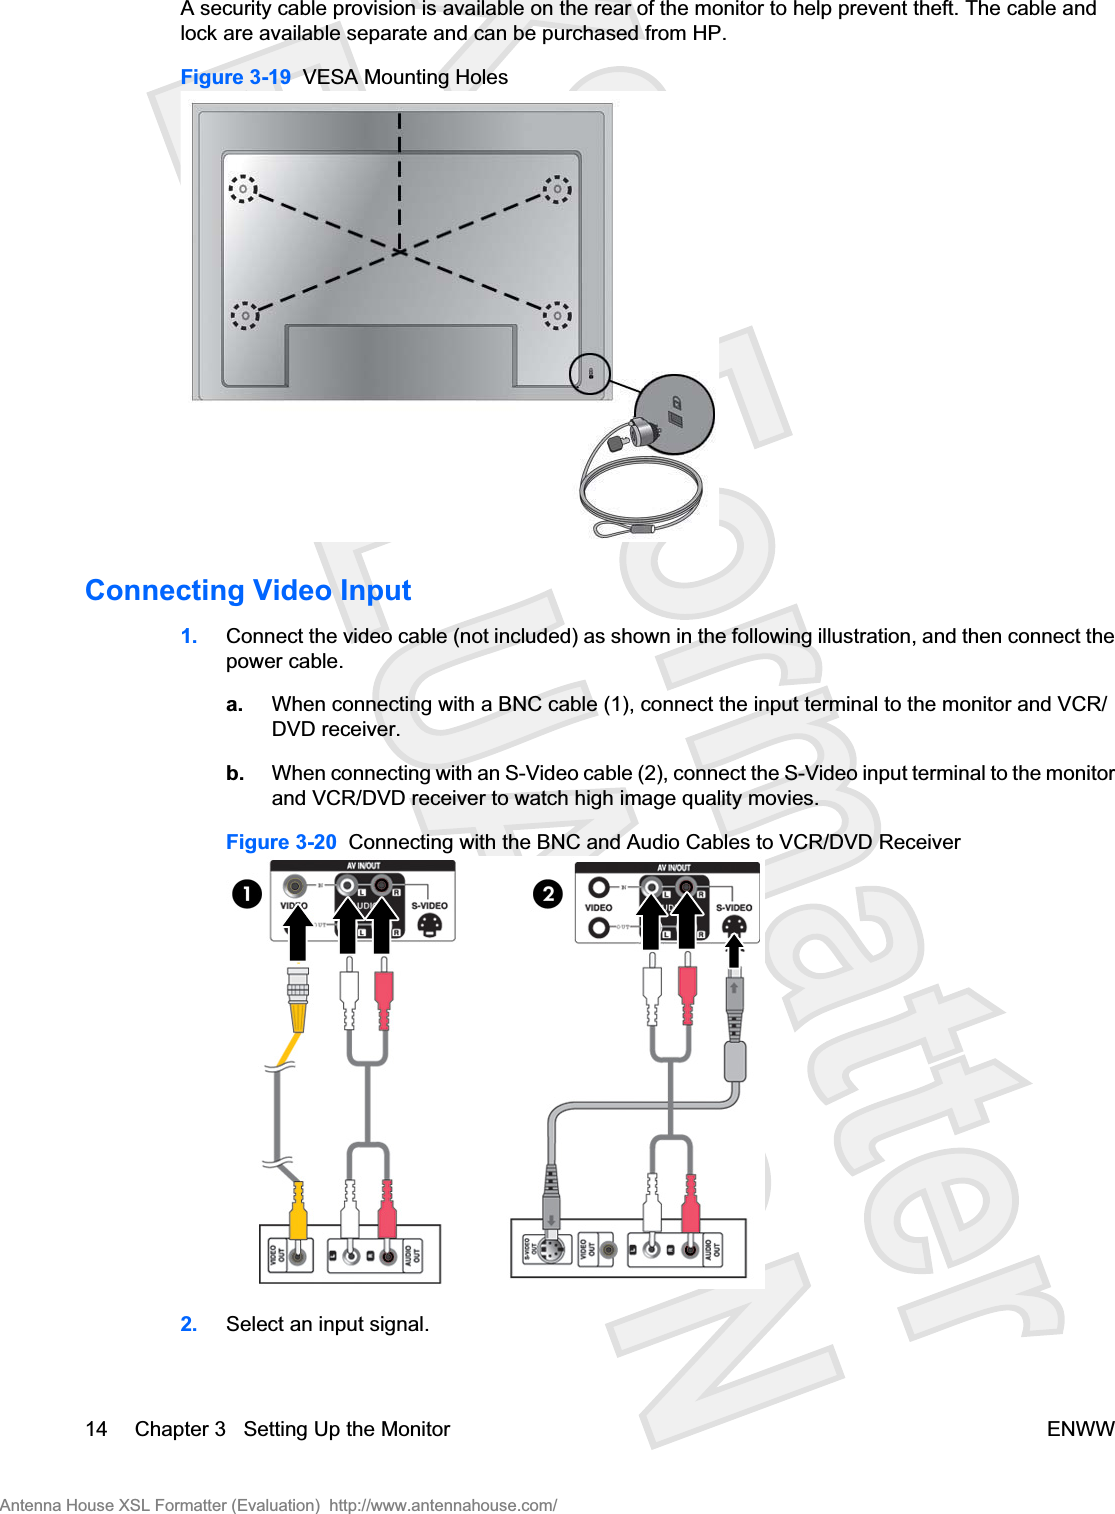 A security cable provision is available on the rear of the monitor to help prevent theft. The cable andlock are available separate and can be purchased from HP.Figure 3-19  VESA Mounting HolesConnecting Video Input1. Connect the video cable (not included) as shown in the following illustration, and then connect thepower cable.a. When connecting with a BNC cable (1), connect the input terminal to the monitor and VCR/DVD receiver.b. When connecting with an S-Video cable (2), connect the S-Video input terminal to the monitorand VCR/DVD receiver to watch high image quality movies.Figure 3-20  Connecting with the BNC and Audio Cables to VCR/DVD Receiver2. Select an input signal.14 Chapter 3   Setting Up the Monitor ENWWAntenna House XSL Formatter (Evaluation)  http://www.antennahouse.com/